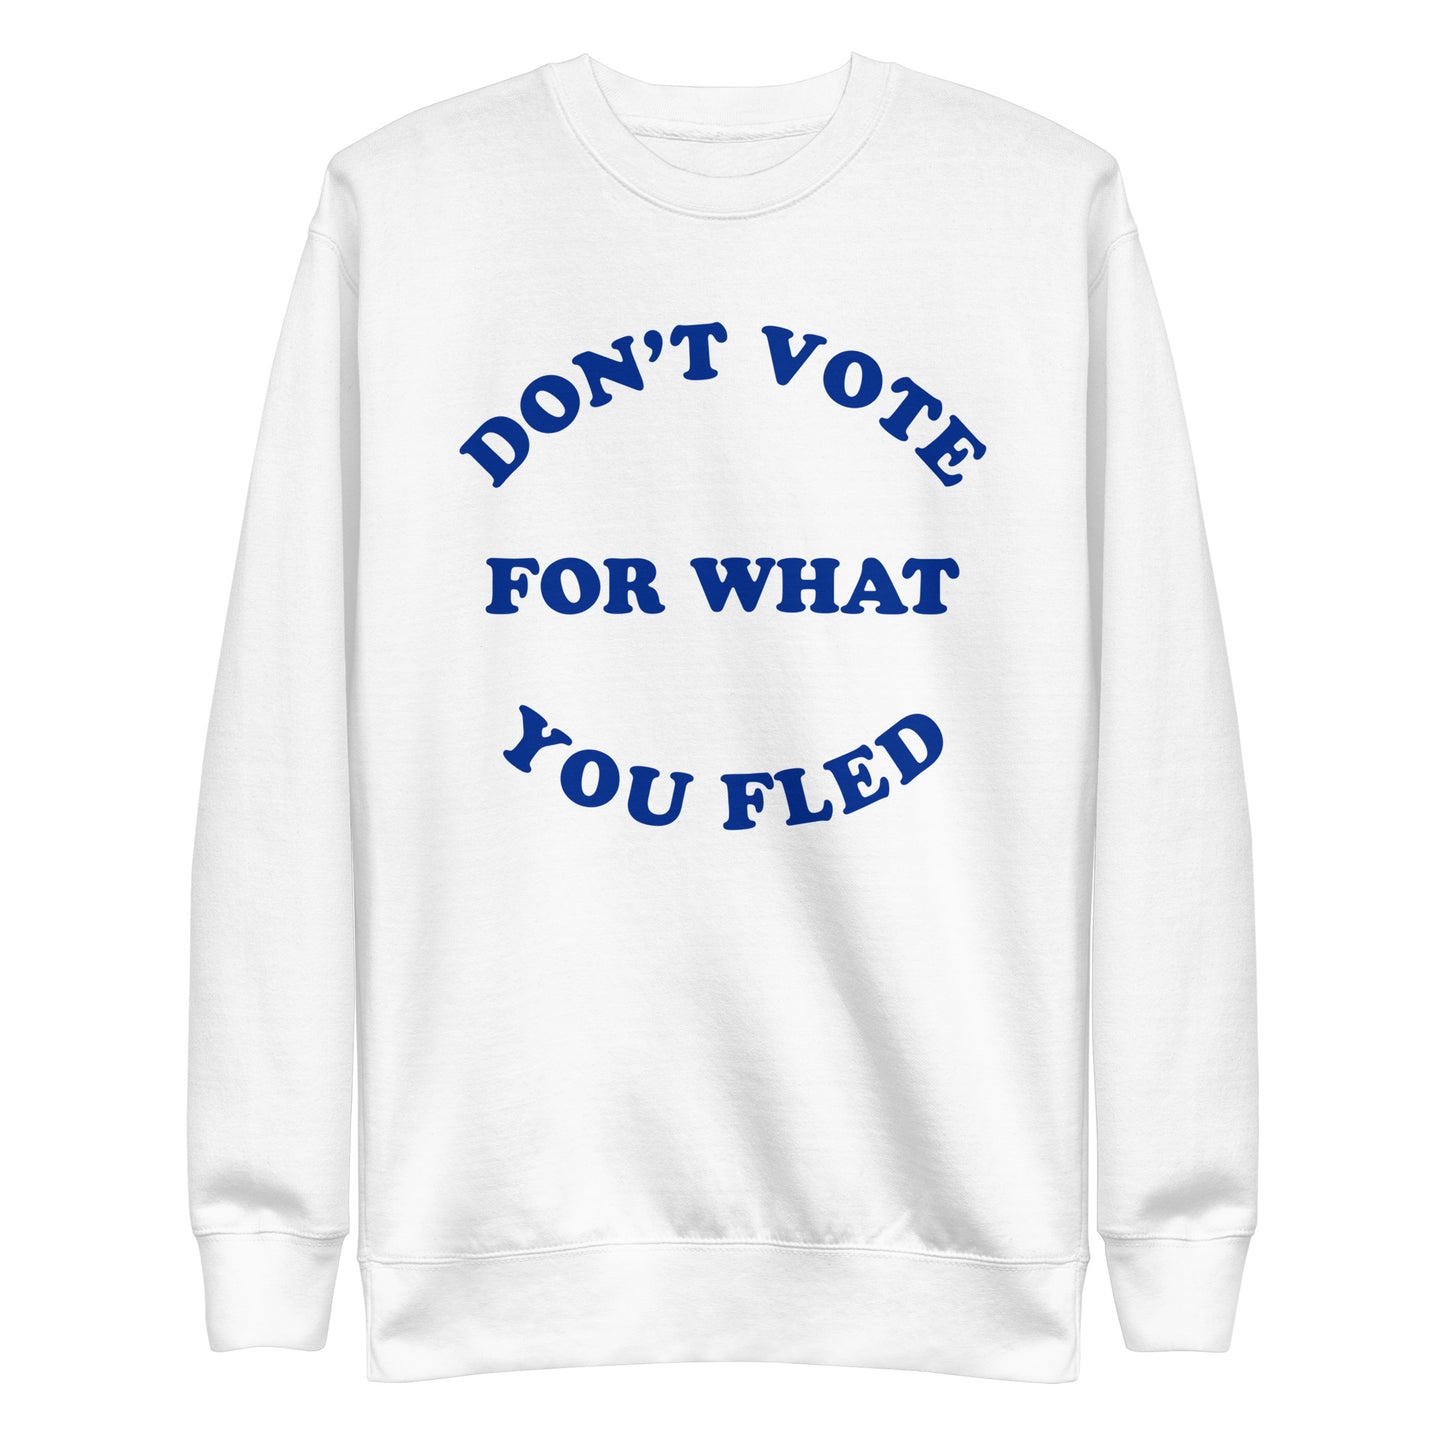 Don't Vote For What You Fled Sweatshirt